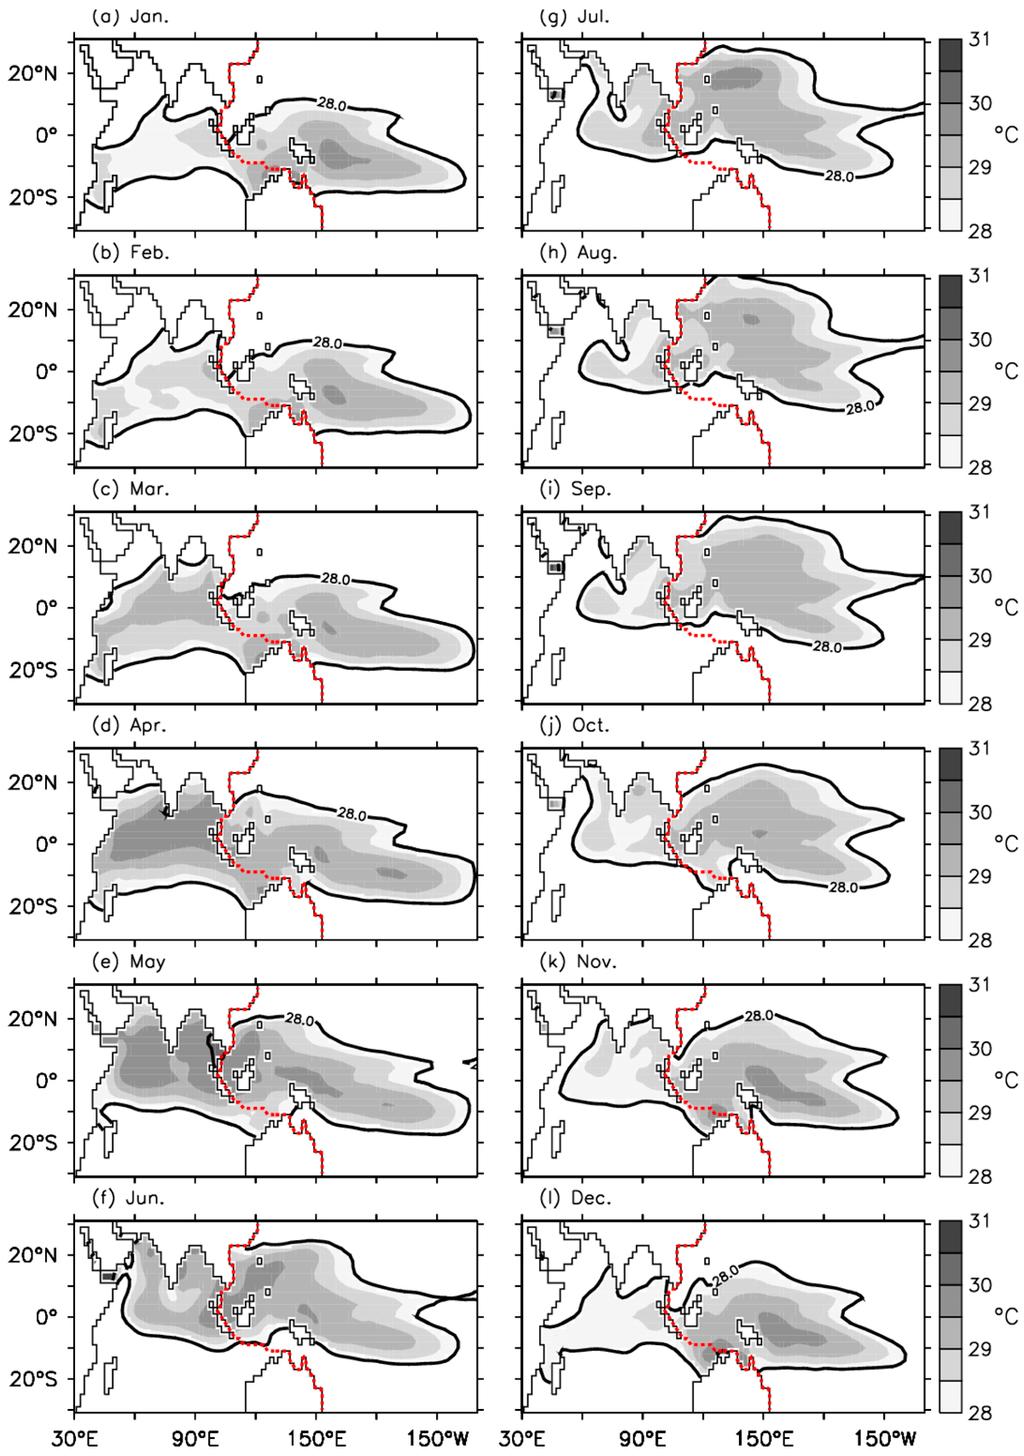 Figure 2. The monthly climatology of the Indo-Pacific warm pool SSTs. Values shown are the monthly mean SSTs greater than 28 C; the threshold used to define the Indo-Pacific warm pool.